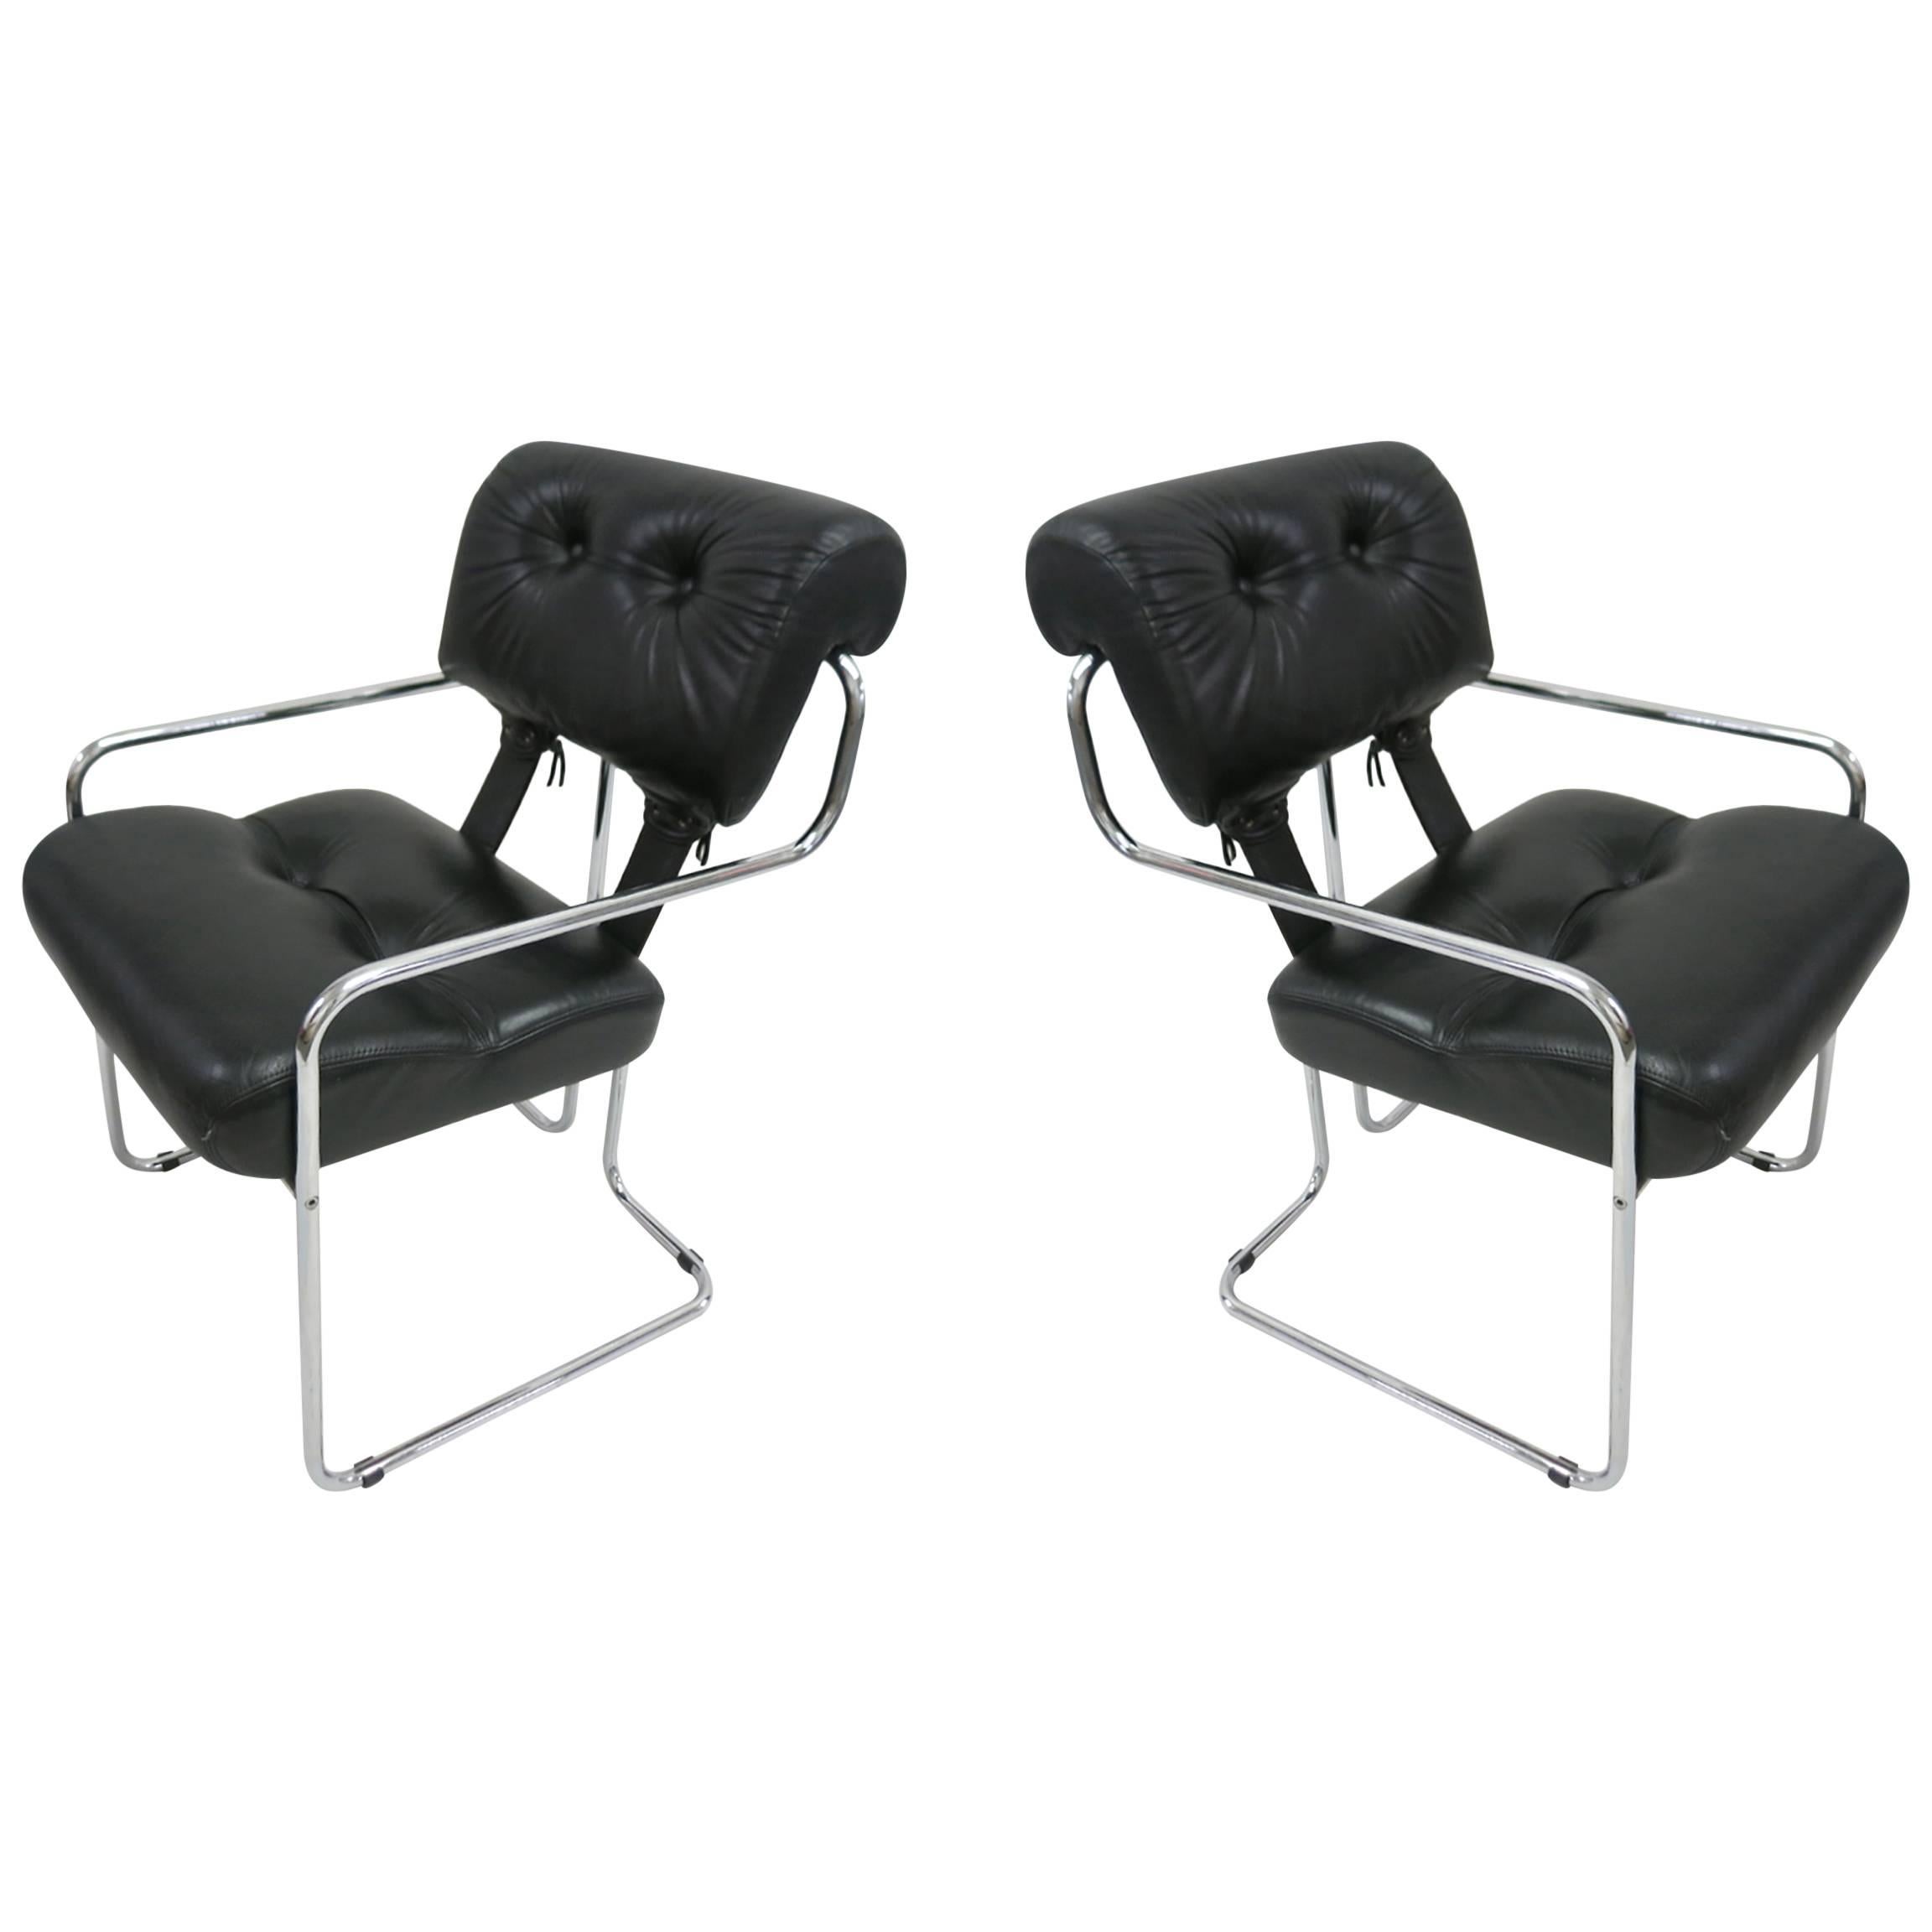 Two Original Tucroma Chairs by Guido Faleschini for I4 Mariani, Italy circa 1972